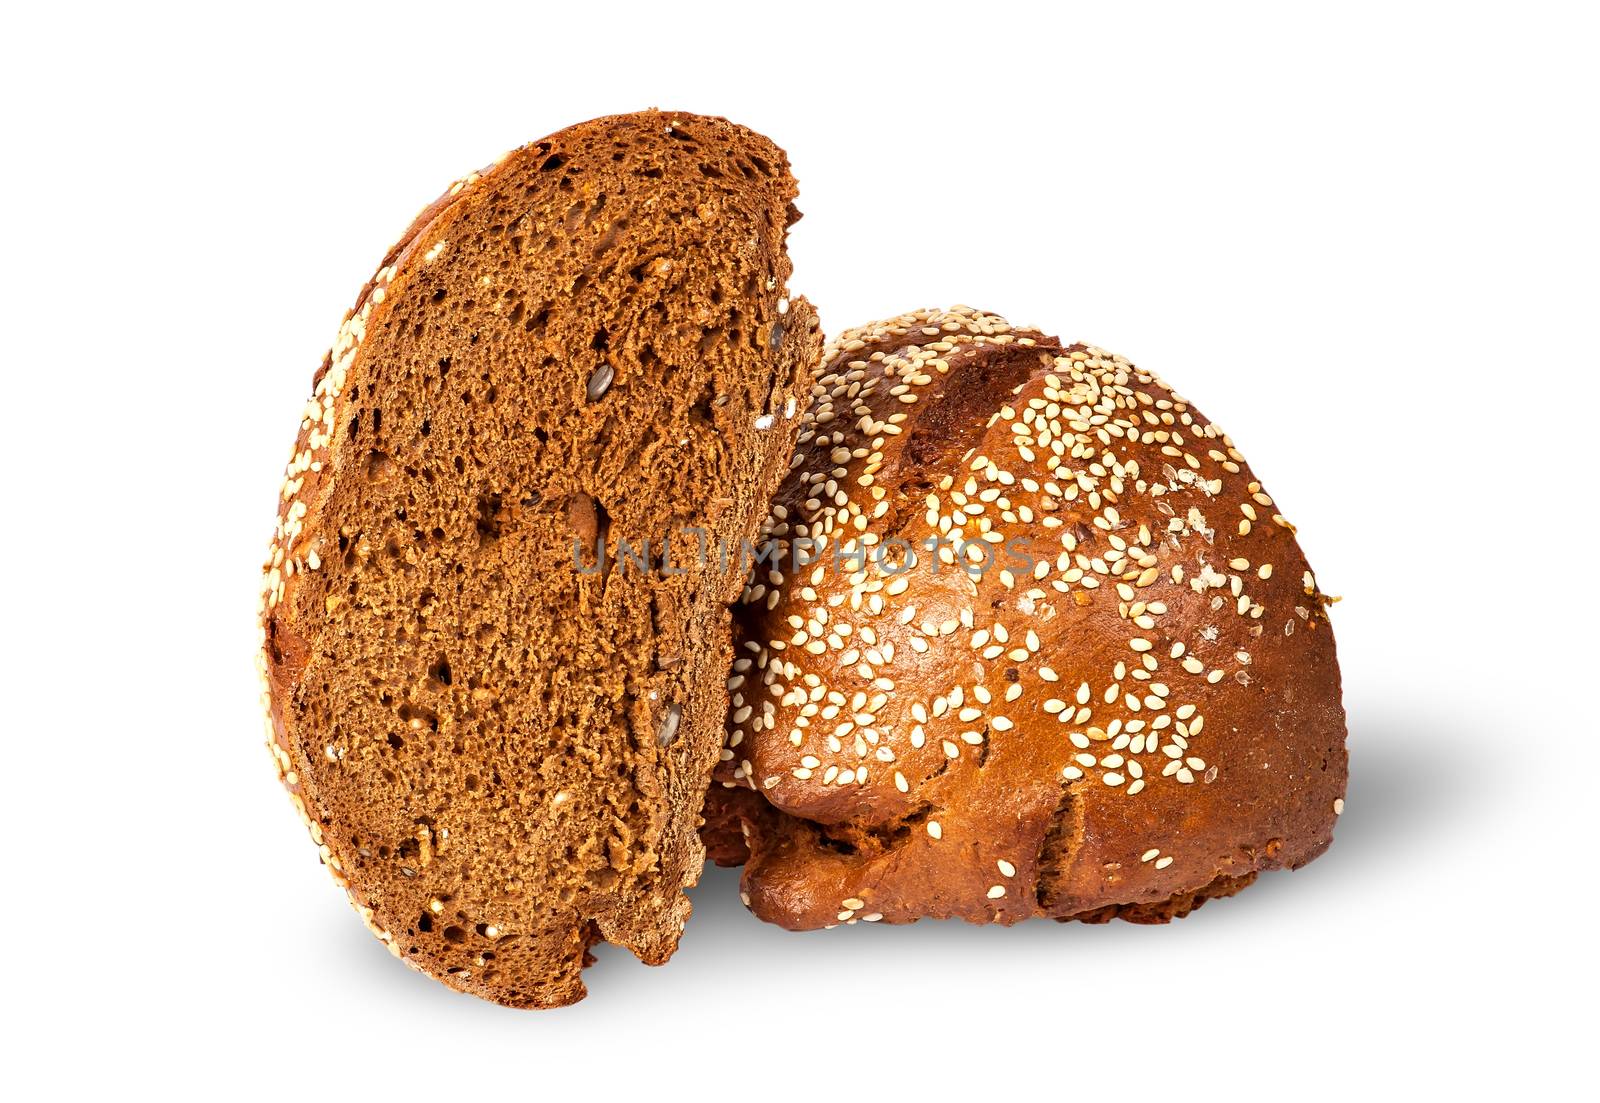 Two halves of rye bread with sesame seeds isolated on white background